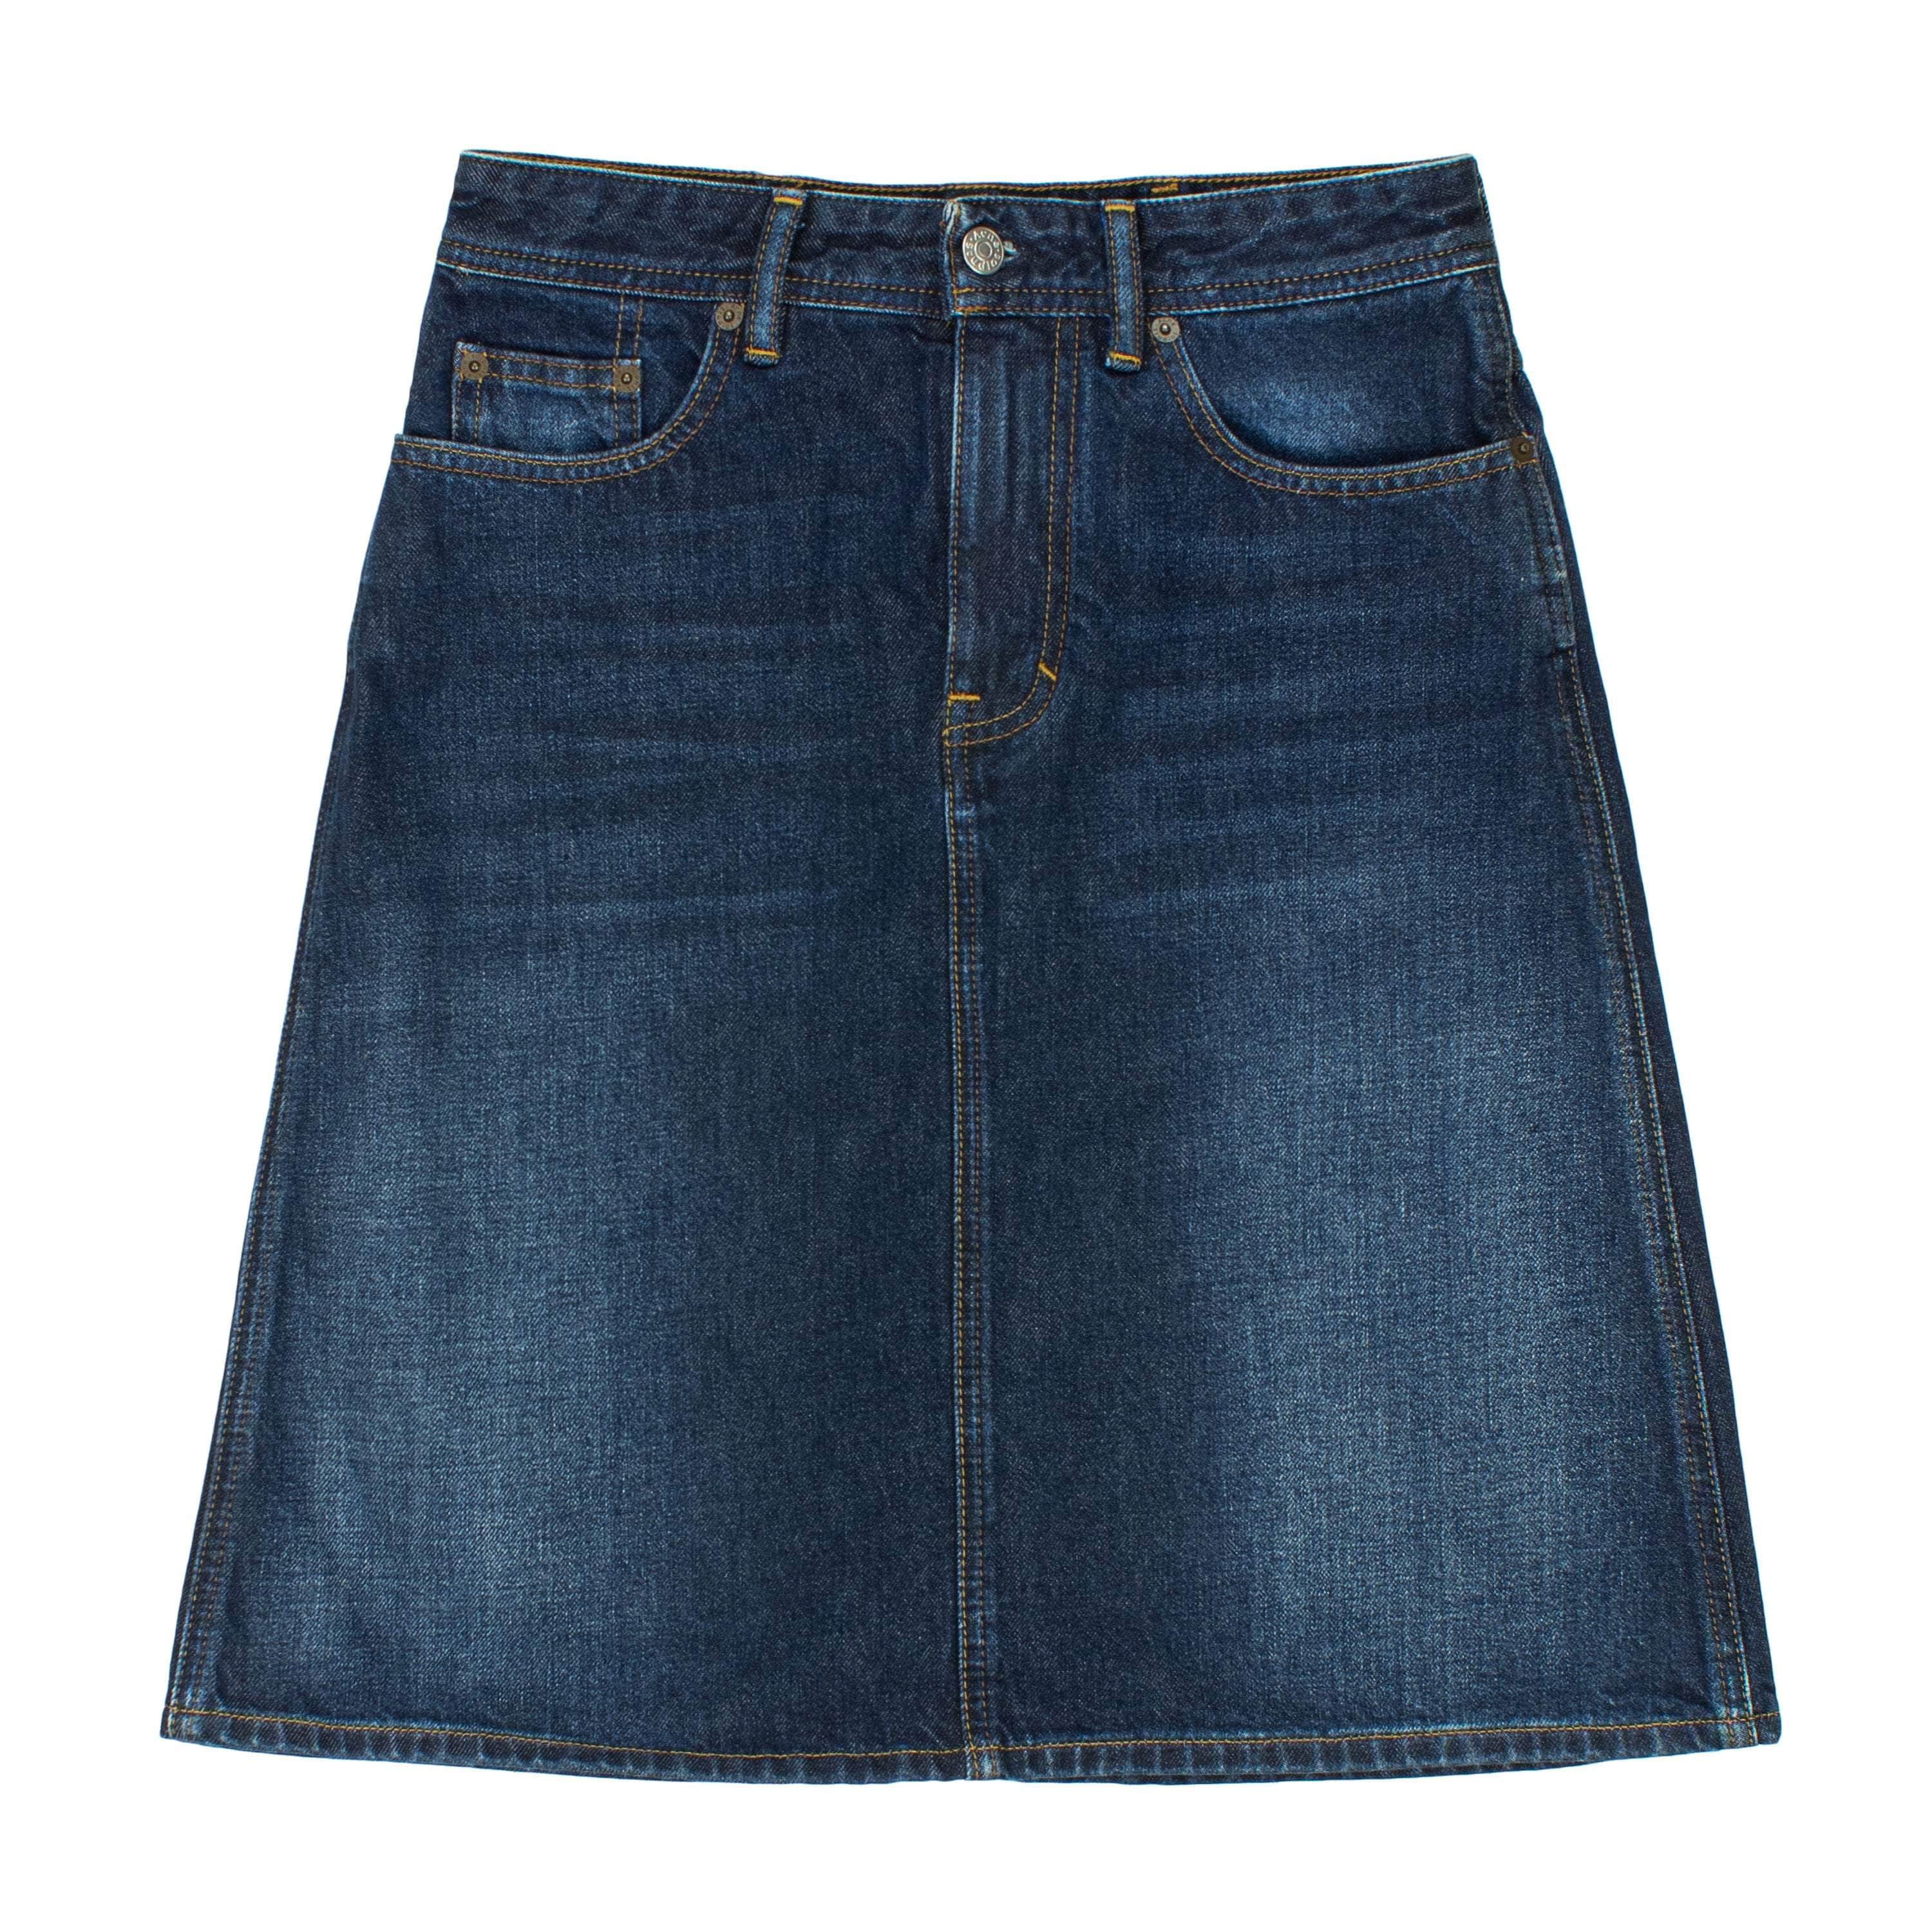 Acne Studios acne-studios, channelenable-all, chicmi, couponcollection, main-clothing, shop375, under-250, womens-mini-skirts 25 SHADOW DARK BLUE DENIM ABVKNEE SKIRT 95-ASO-0001/25 95-ASO-0001/25